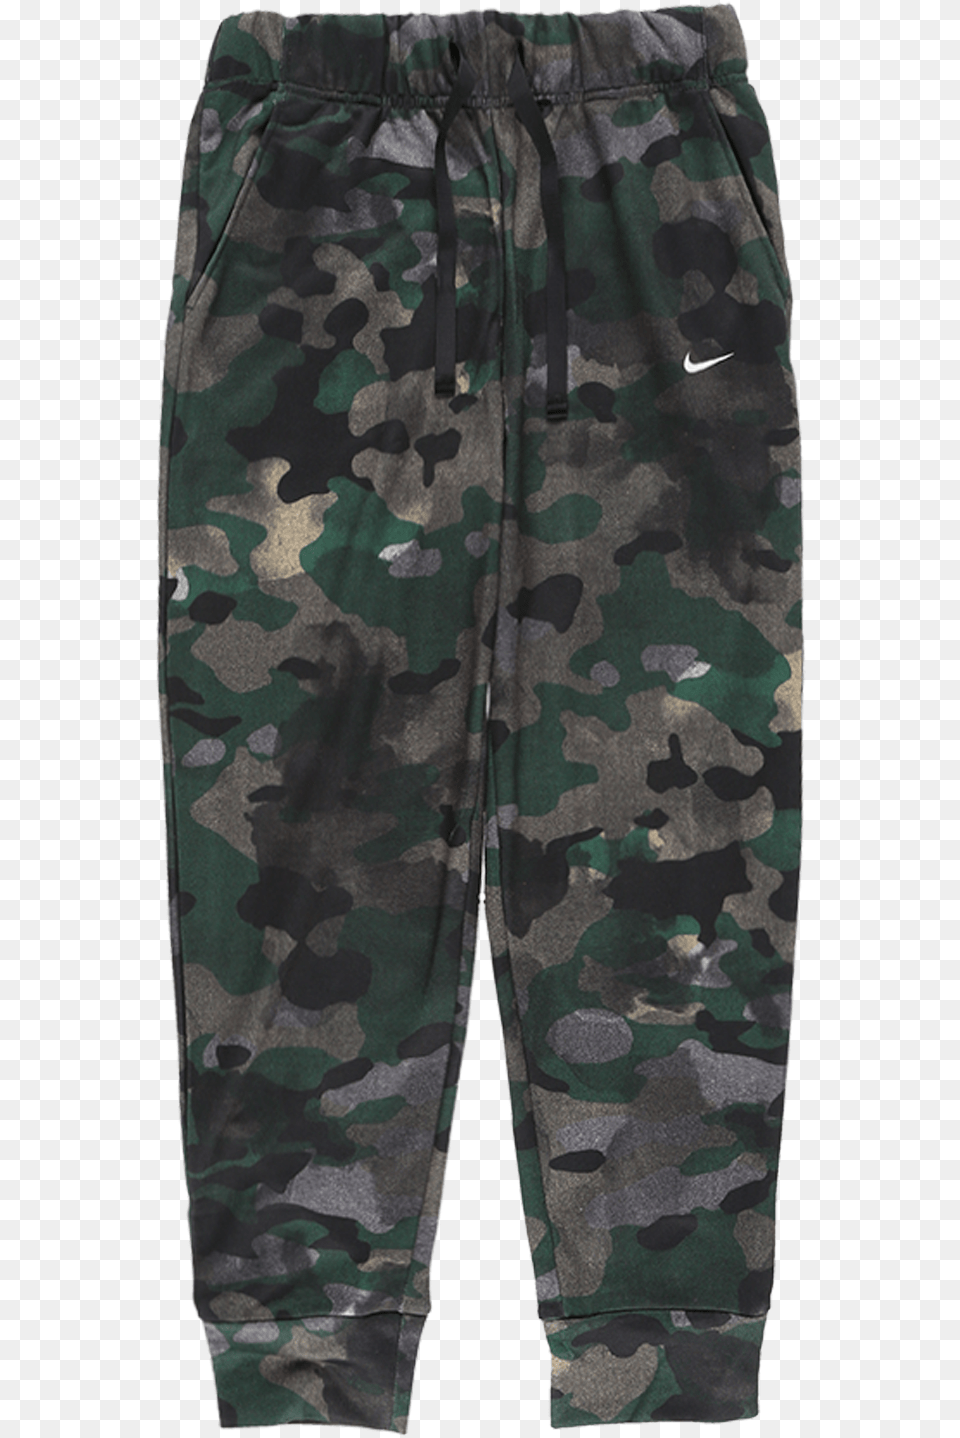 Nike Dri Fit Camo Pants Pocket, Clothing, Military, Military Uniform, Camouflage Free Png Download